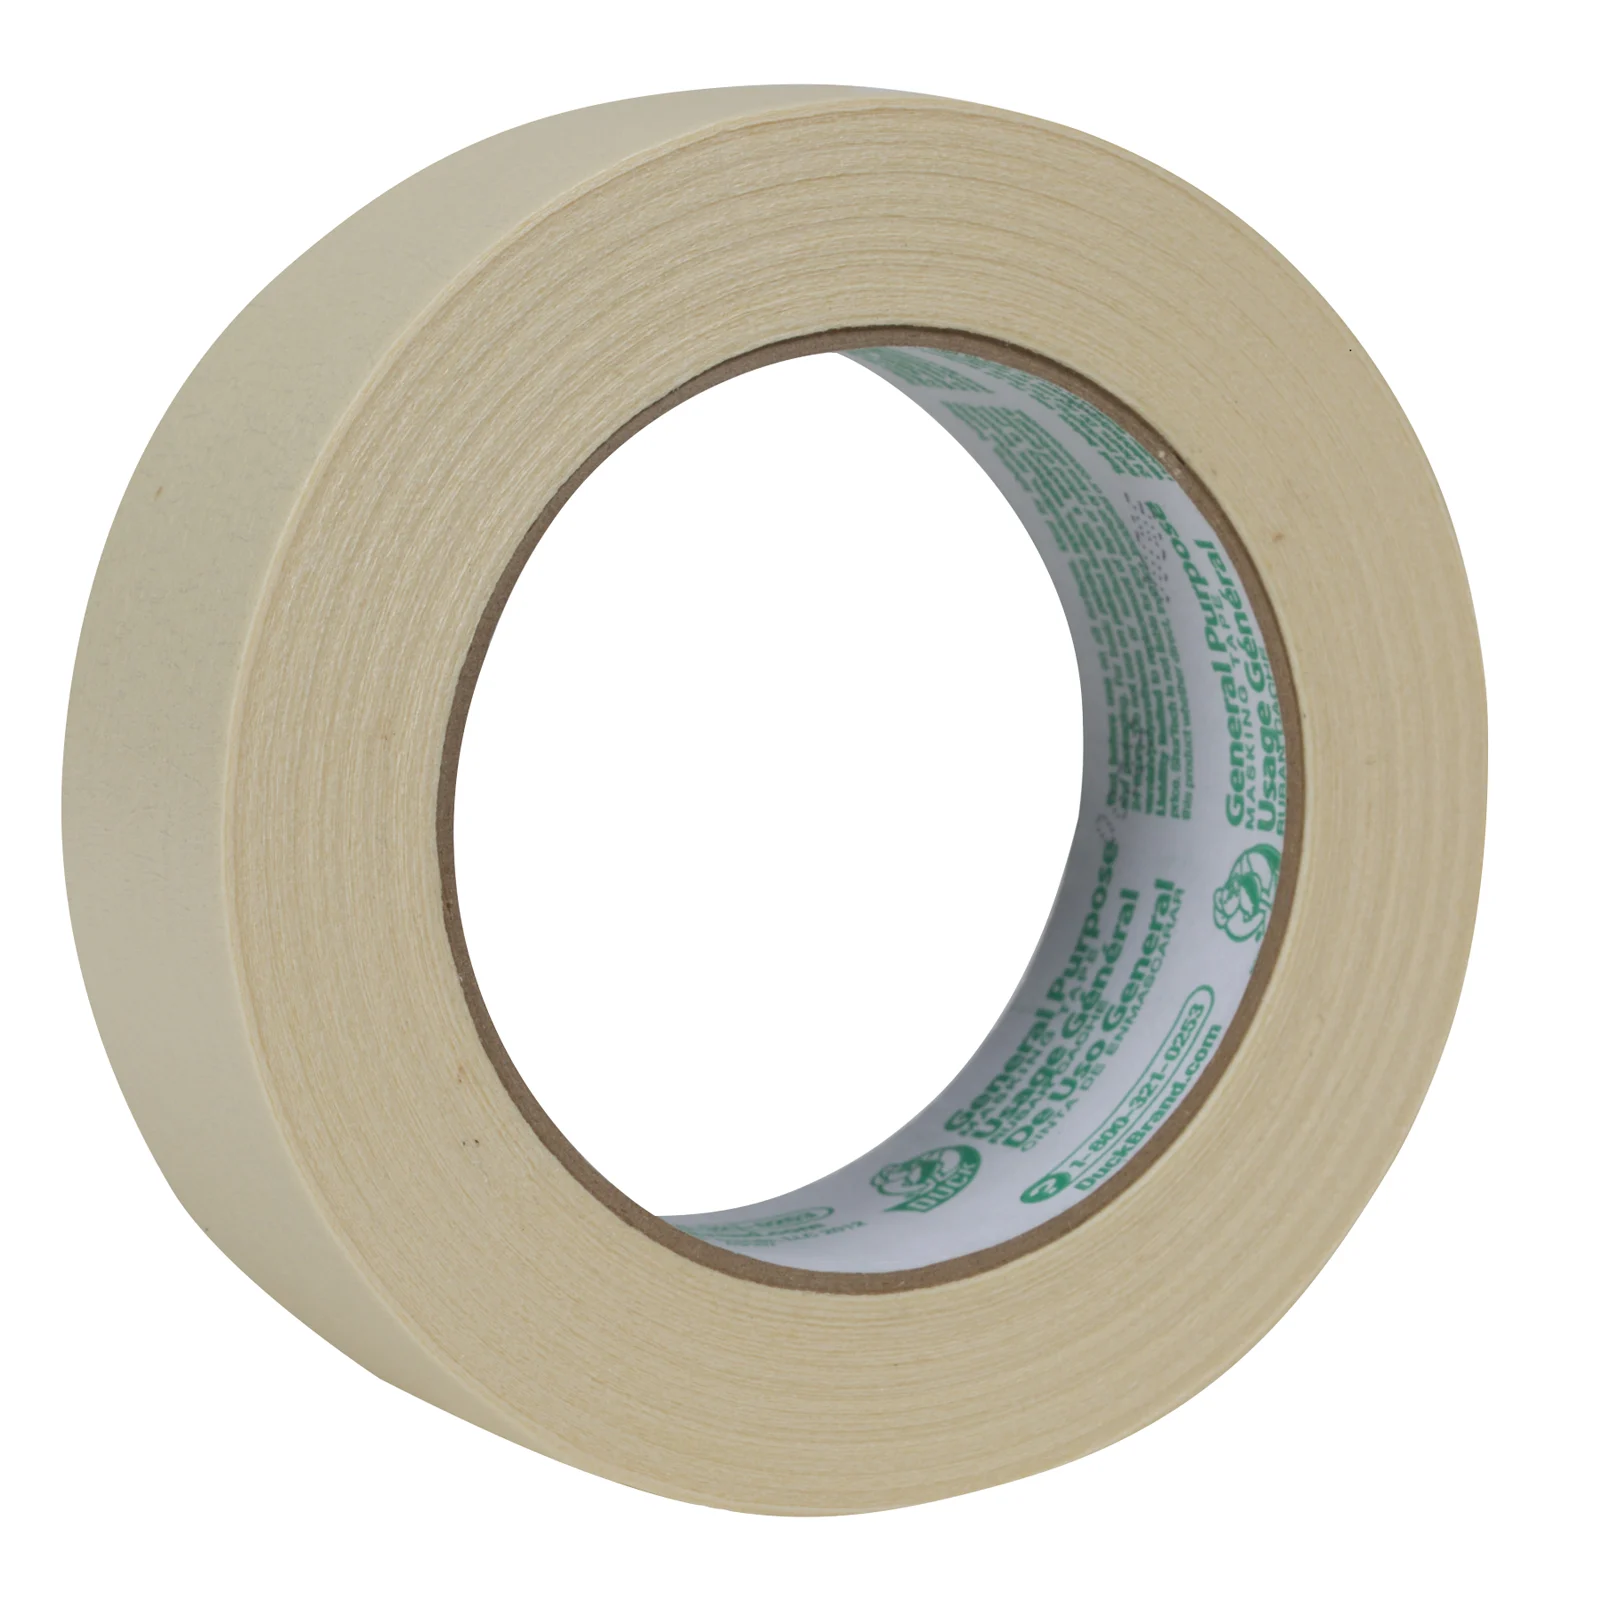 How Does Duct Tape Differ from Masking Tape? - Tape University®